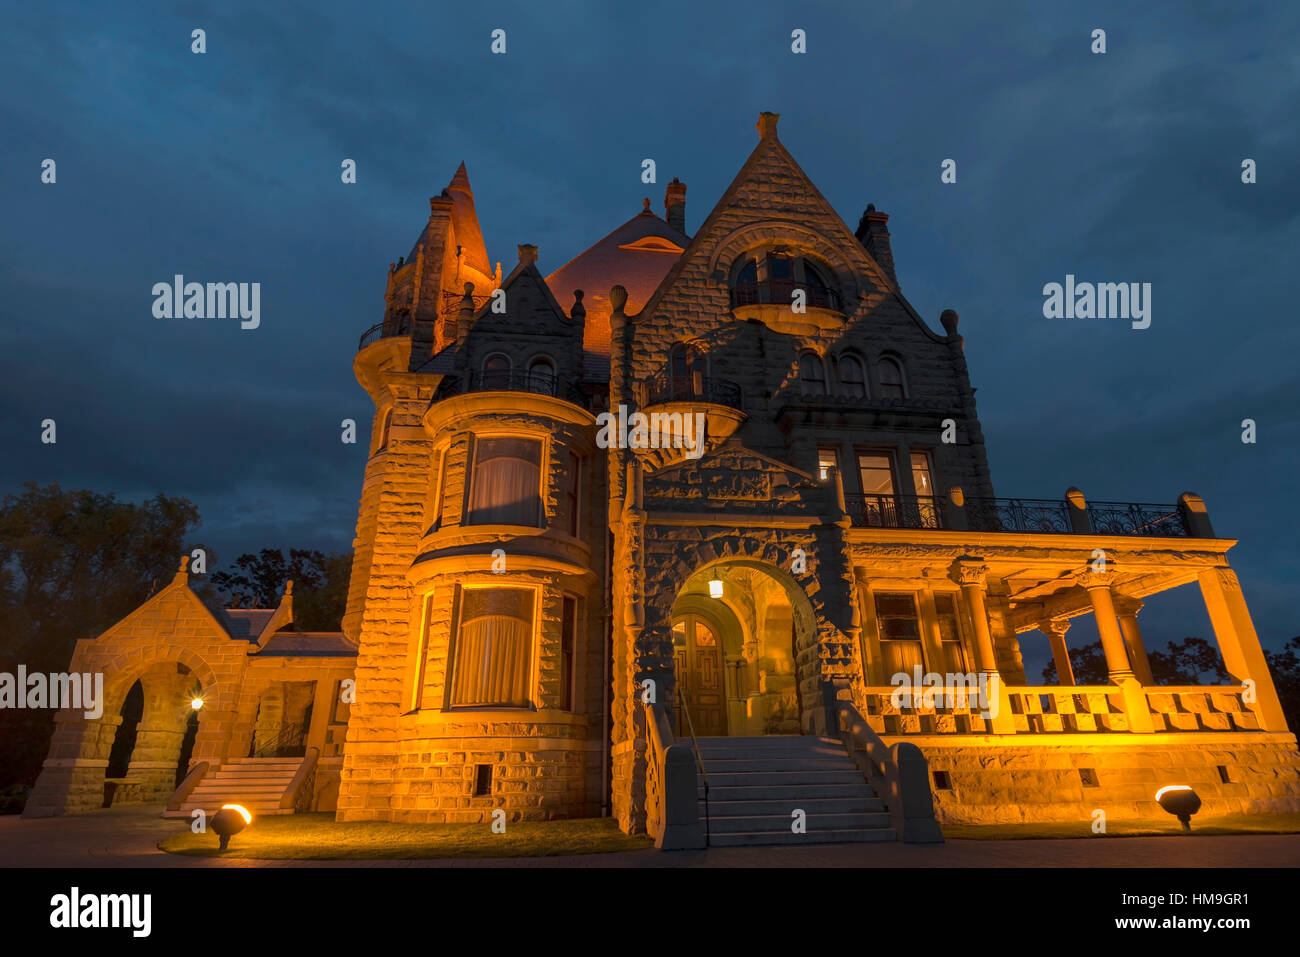 Canada National Historic Building in Vancouver Island -  Night  view of craigdarroch castle side 1. Stock Photo